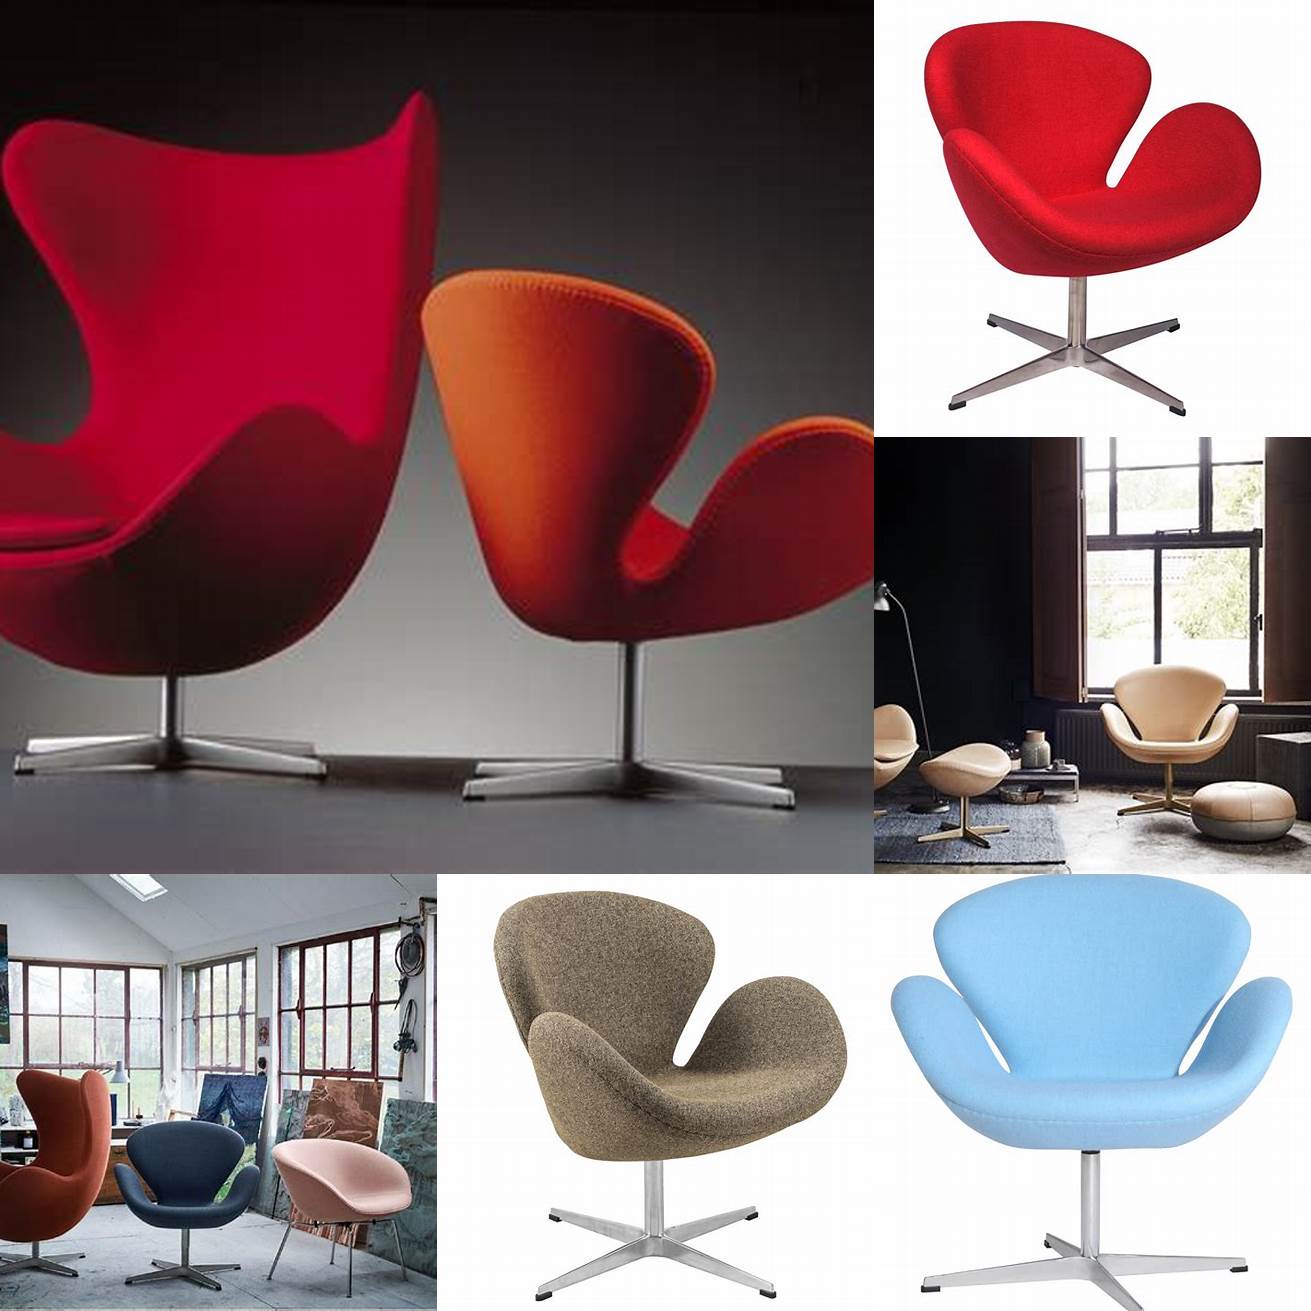 Arne Jacobsens Swan and Egg chairs